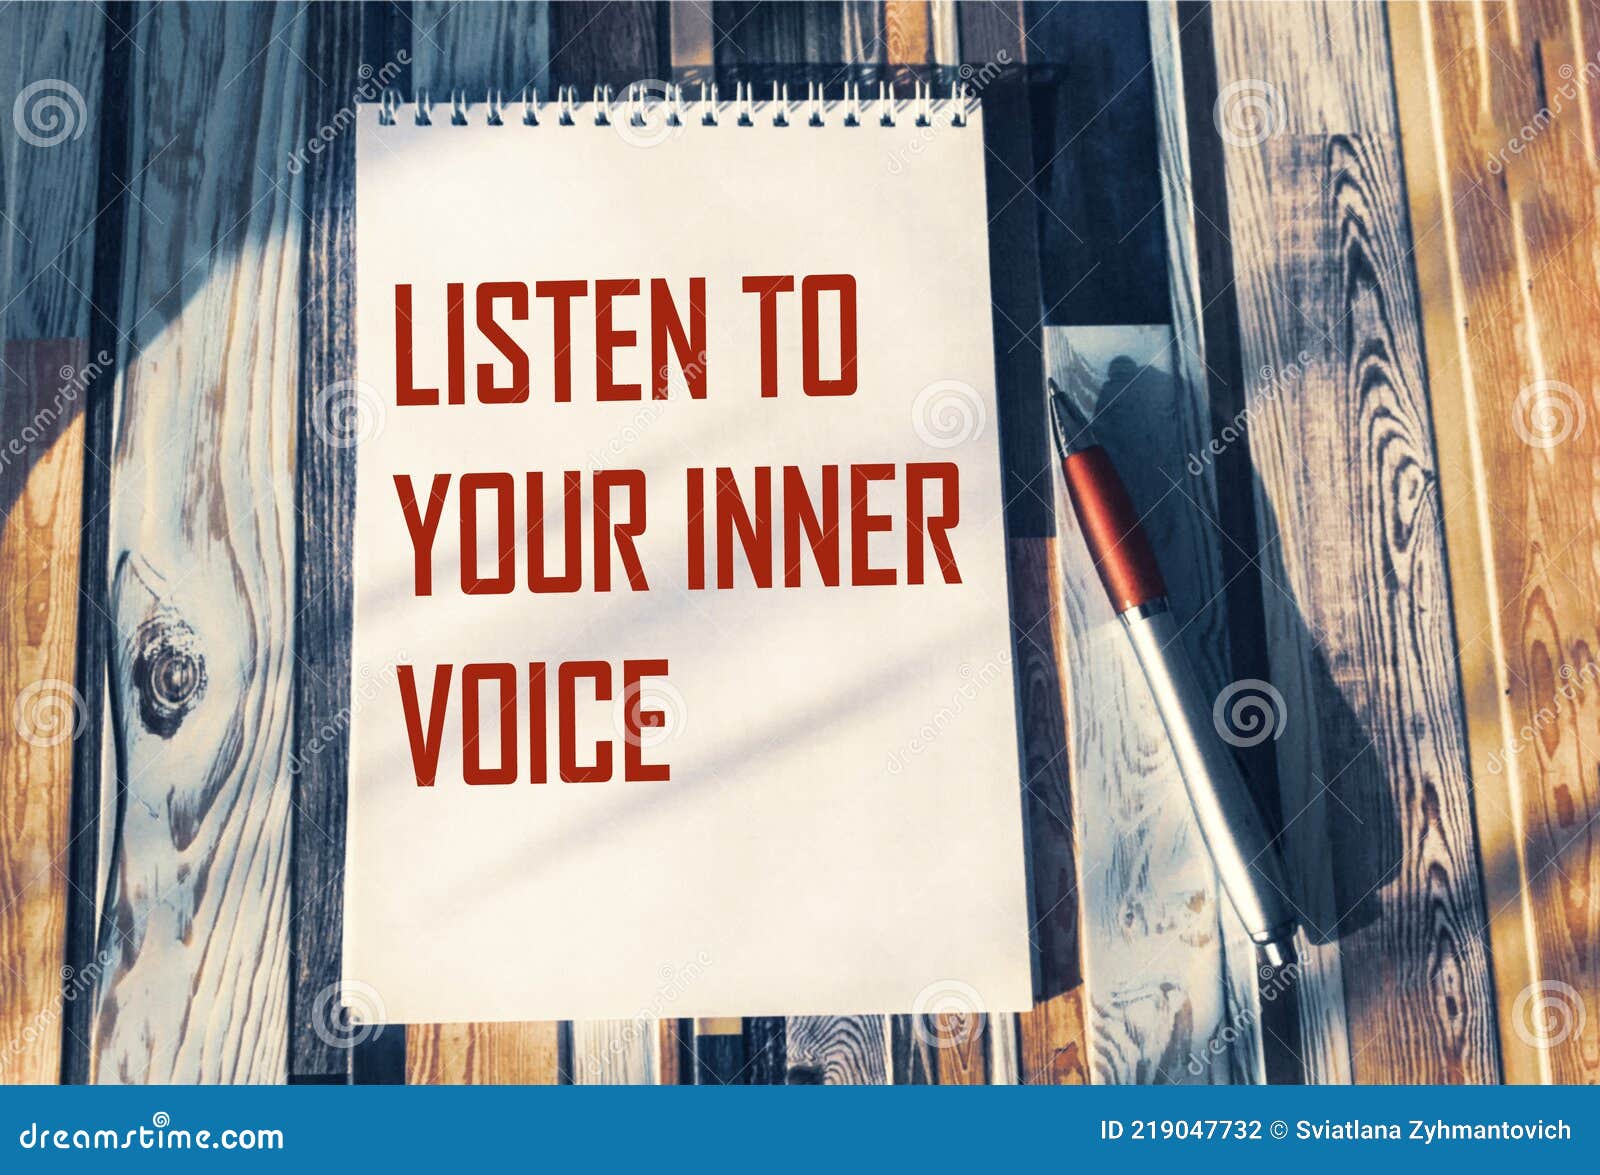 listen to your inner voice - inspiring phrase on a notebook. confidence, intuition